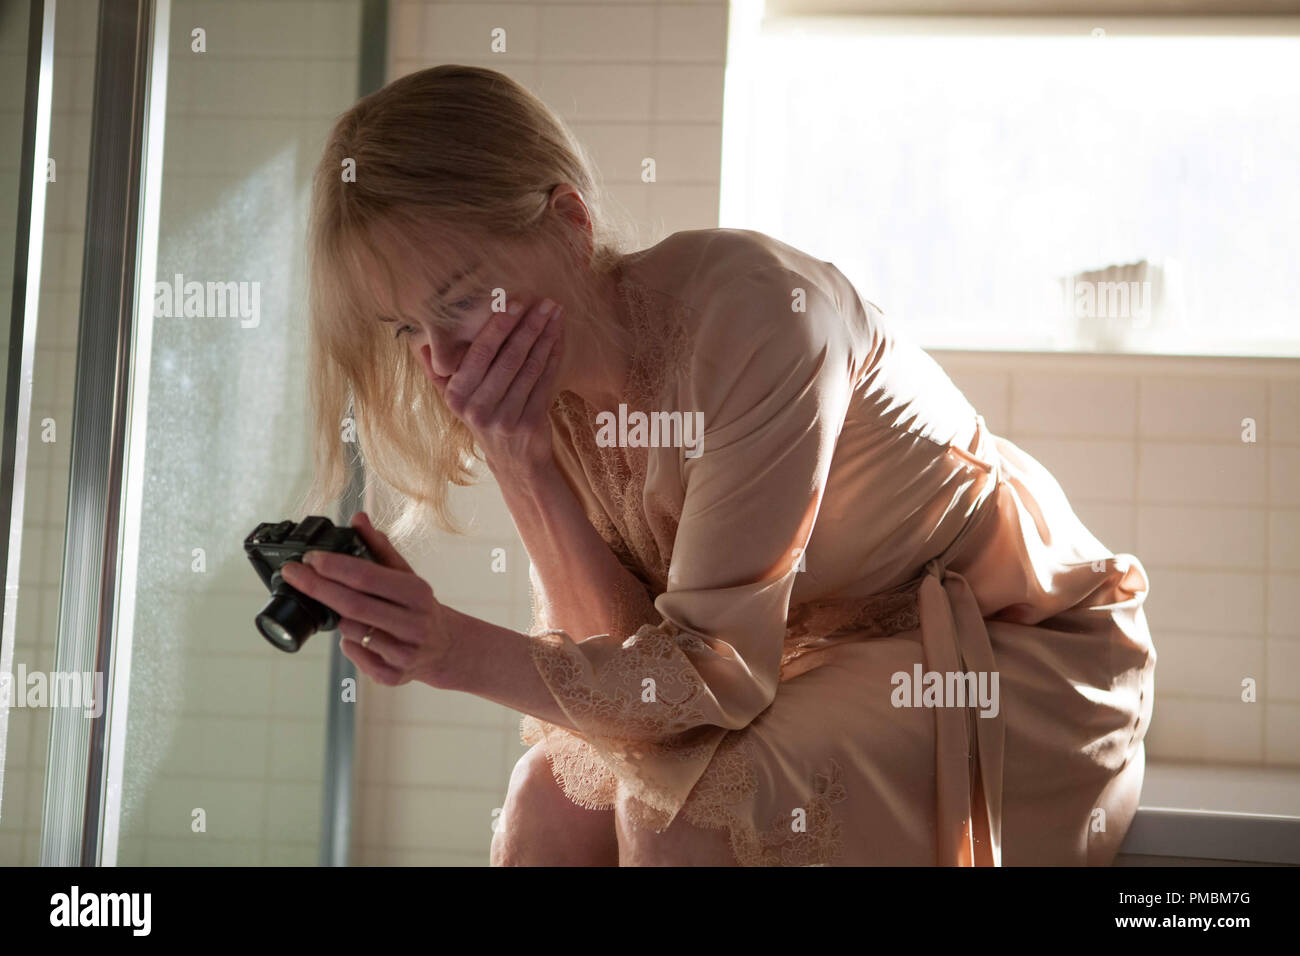 Christine Lucas (NICOLE KIDMAN), a troubled amnesiac, makes a shocking discovery about her past while watching her own video diary in BEFORE I GO TO SLEEP. Stock Photo